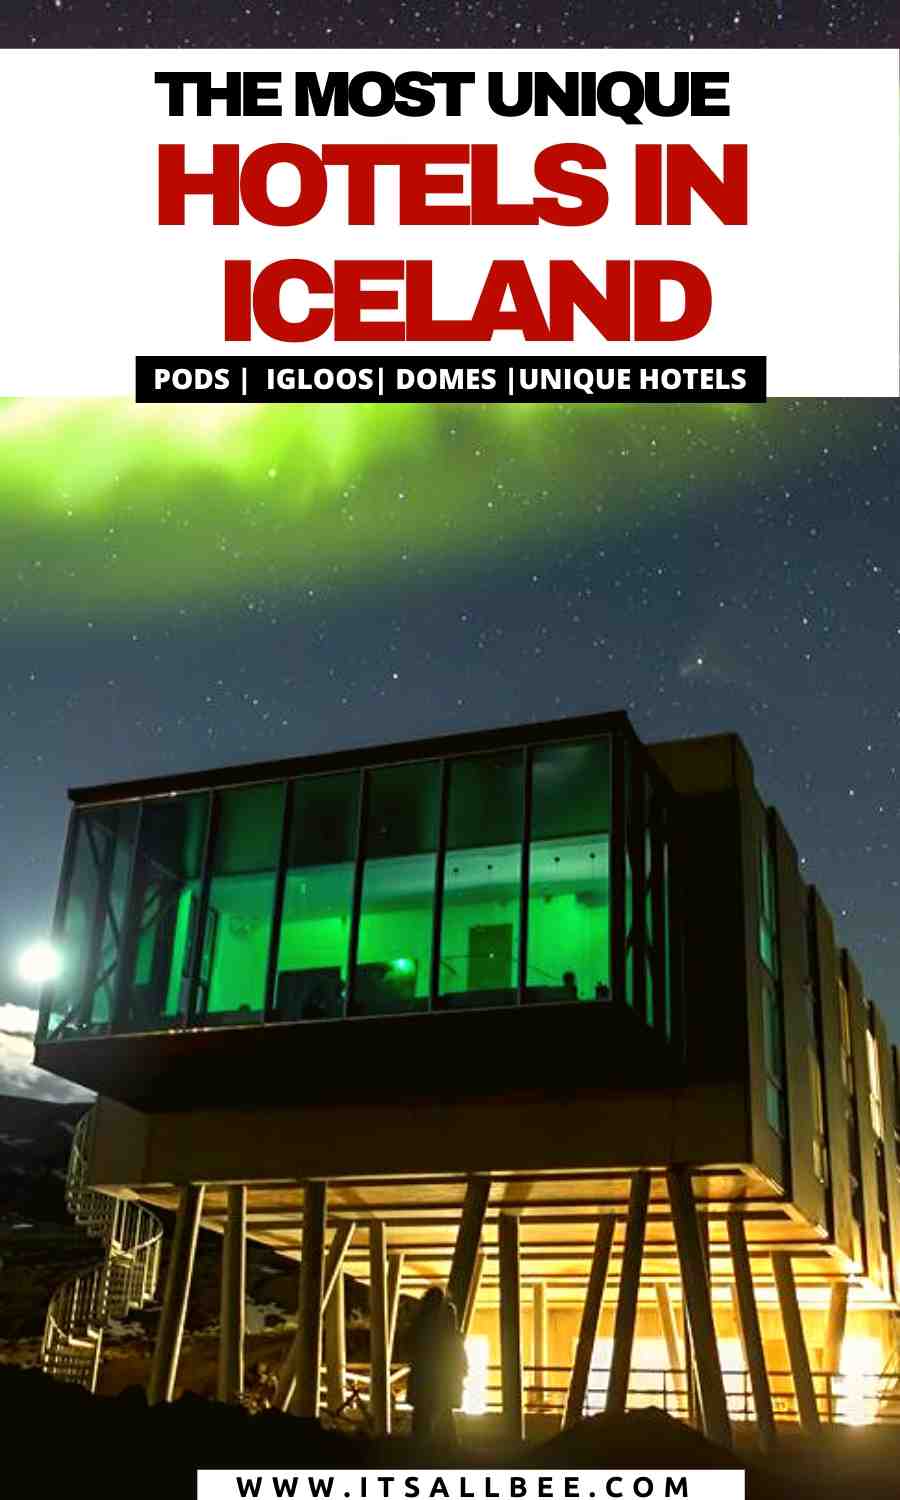 unusual places to stay in iceland - cool places to stay in iceland - coolest places to stay in iceland